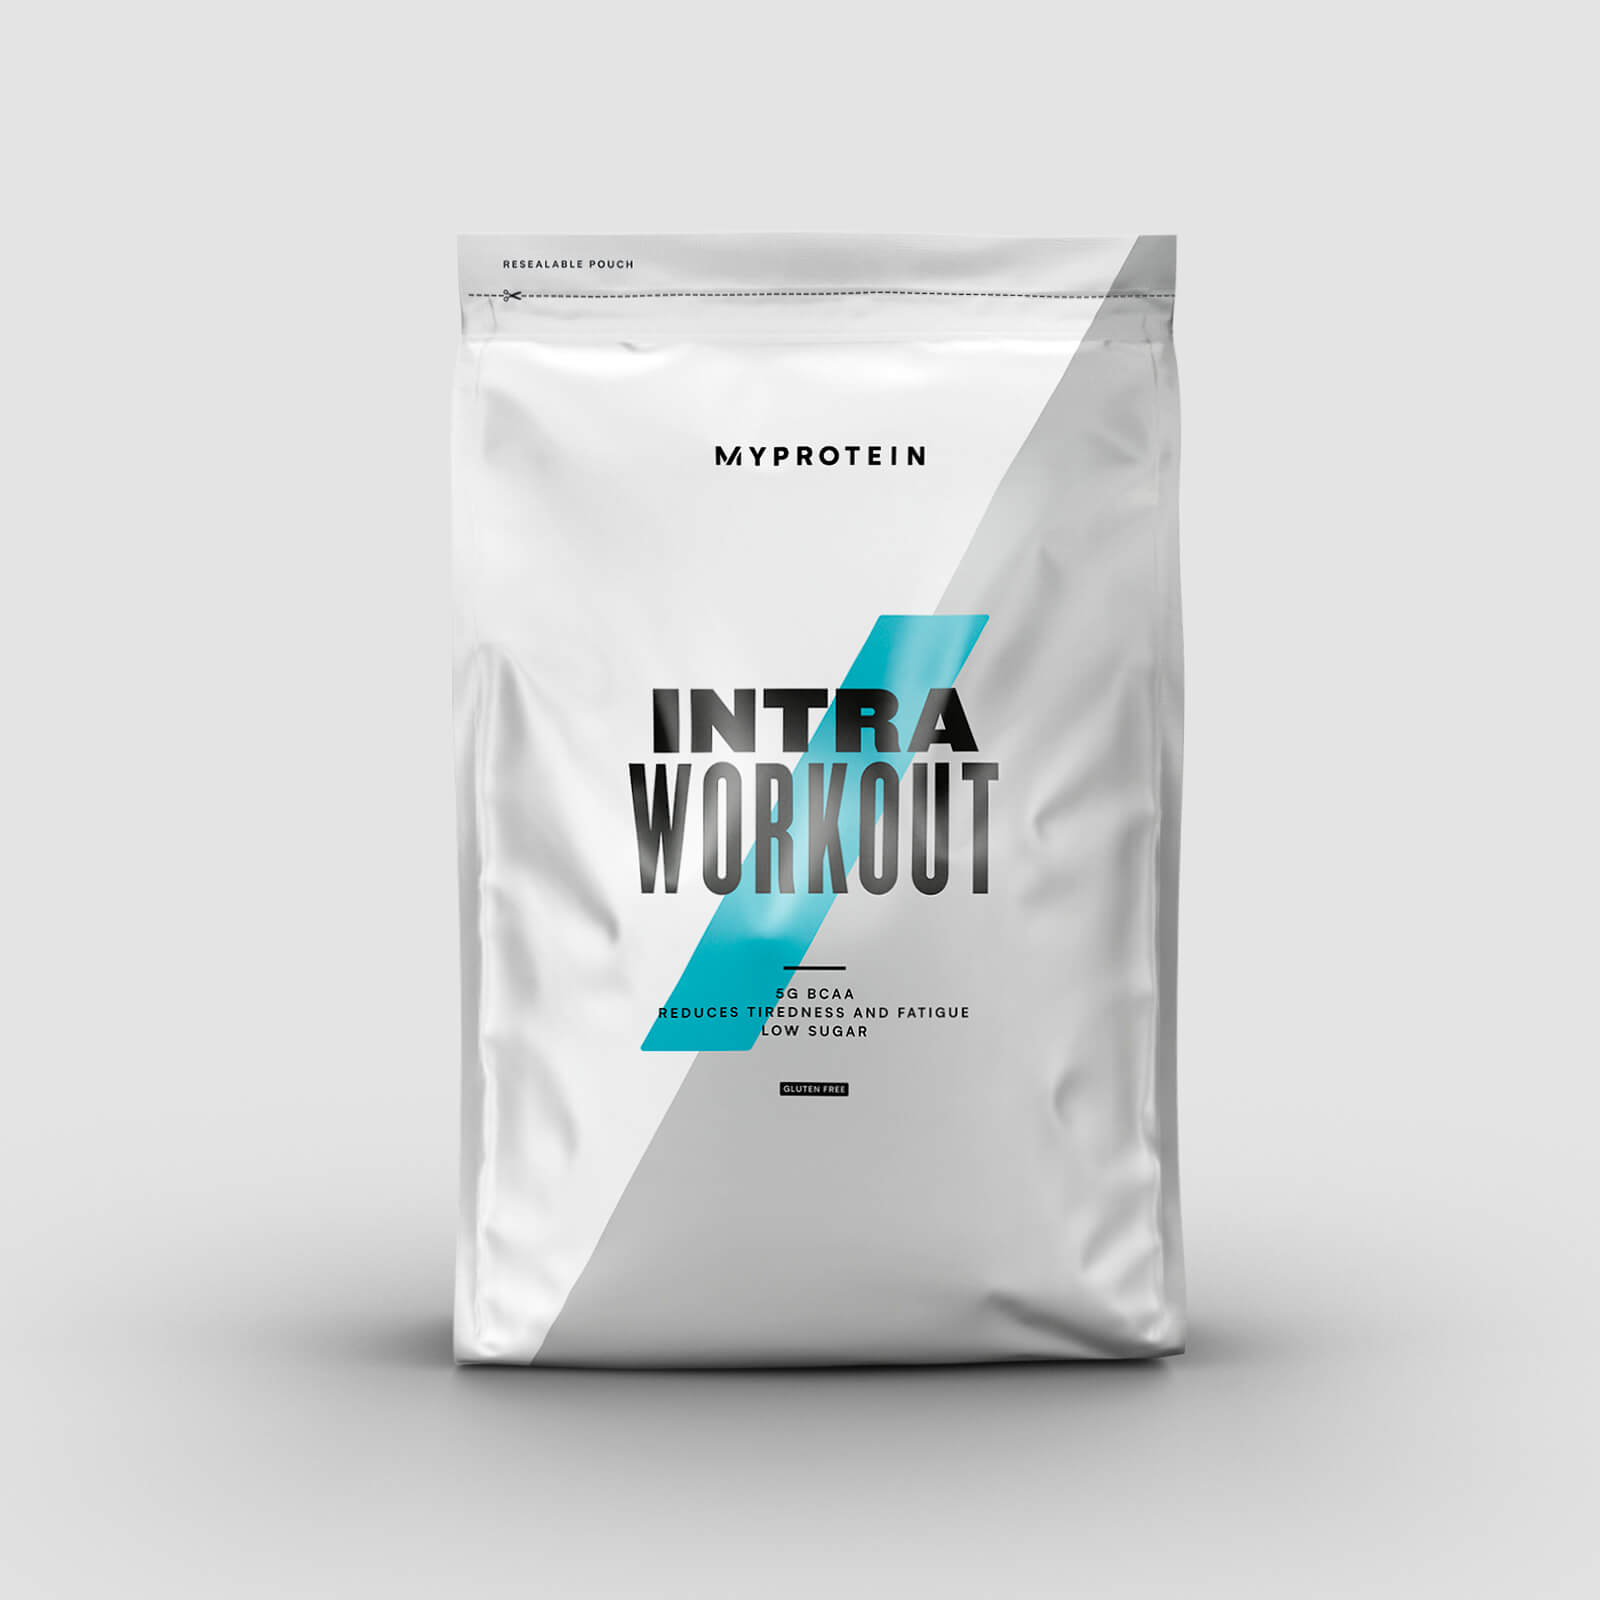 Myprotein Intra Workout - 1kg - Mirtillo rosso e lampone